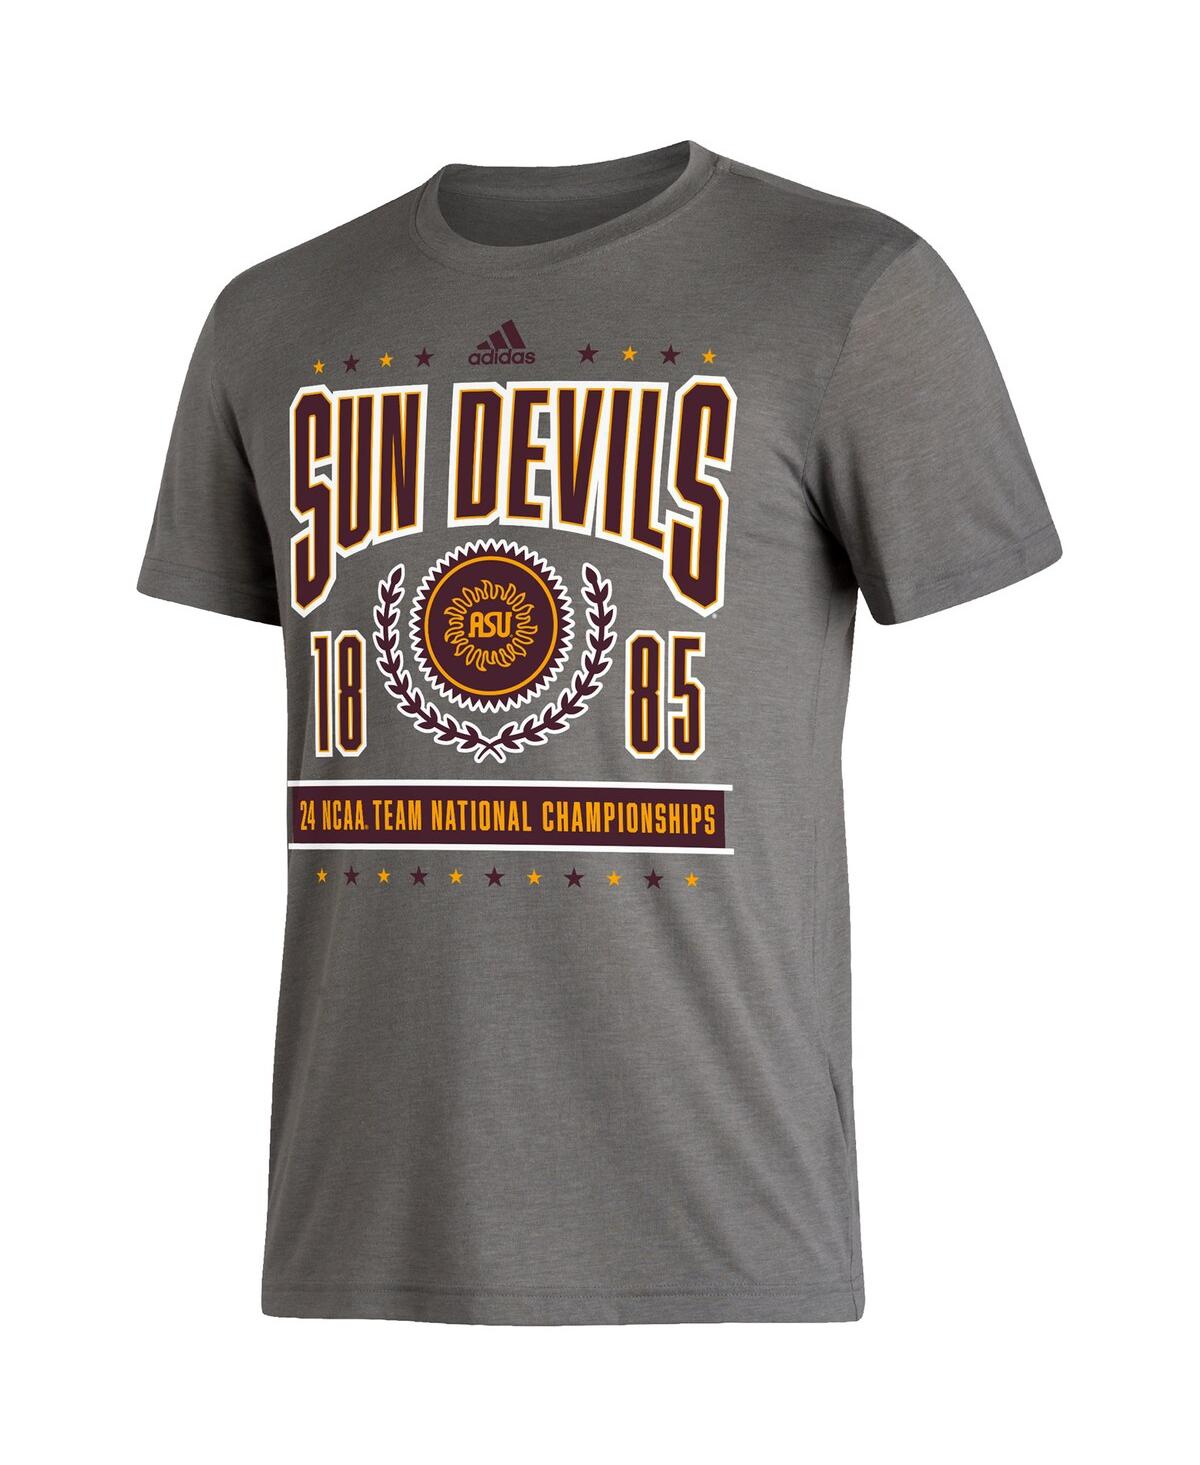 Shop Adidas Originals Men's Adidas Heathered Charcoal Arizona State Sun Devils 24 Ncaa Team National Championships Reminis In Heather Charcoal